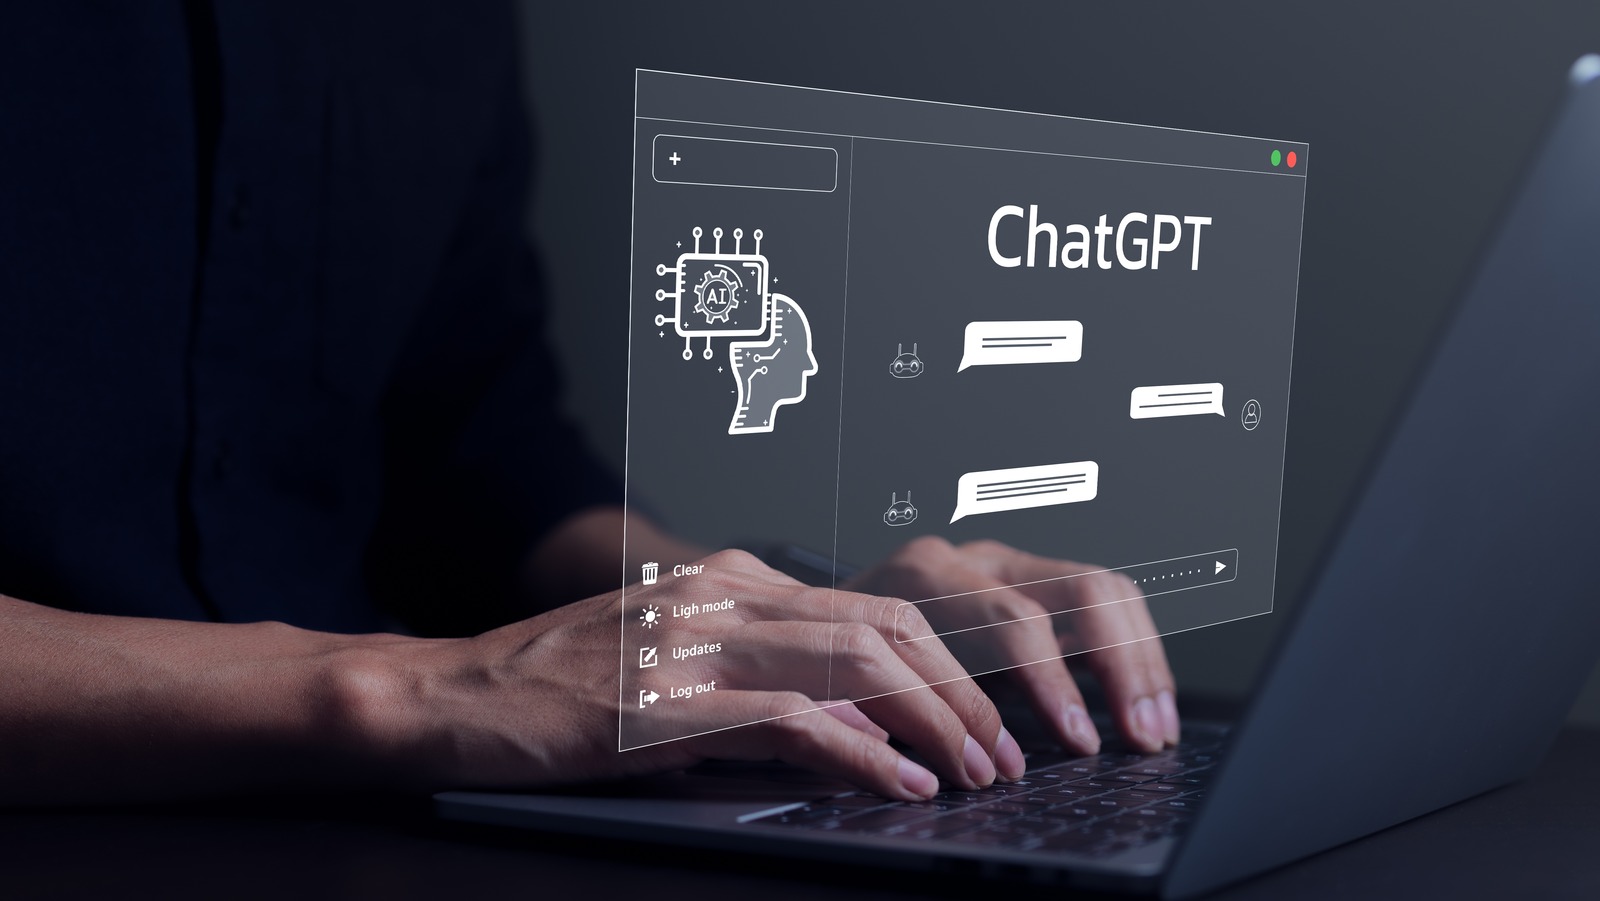 Unsettling Reasons To Avoid Sharing Personal Information With ChatGPT